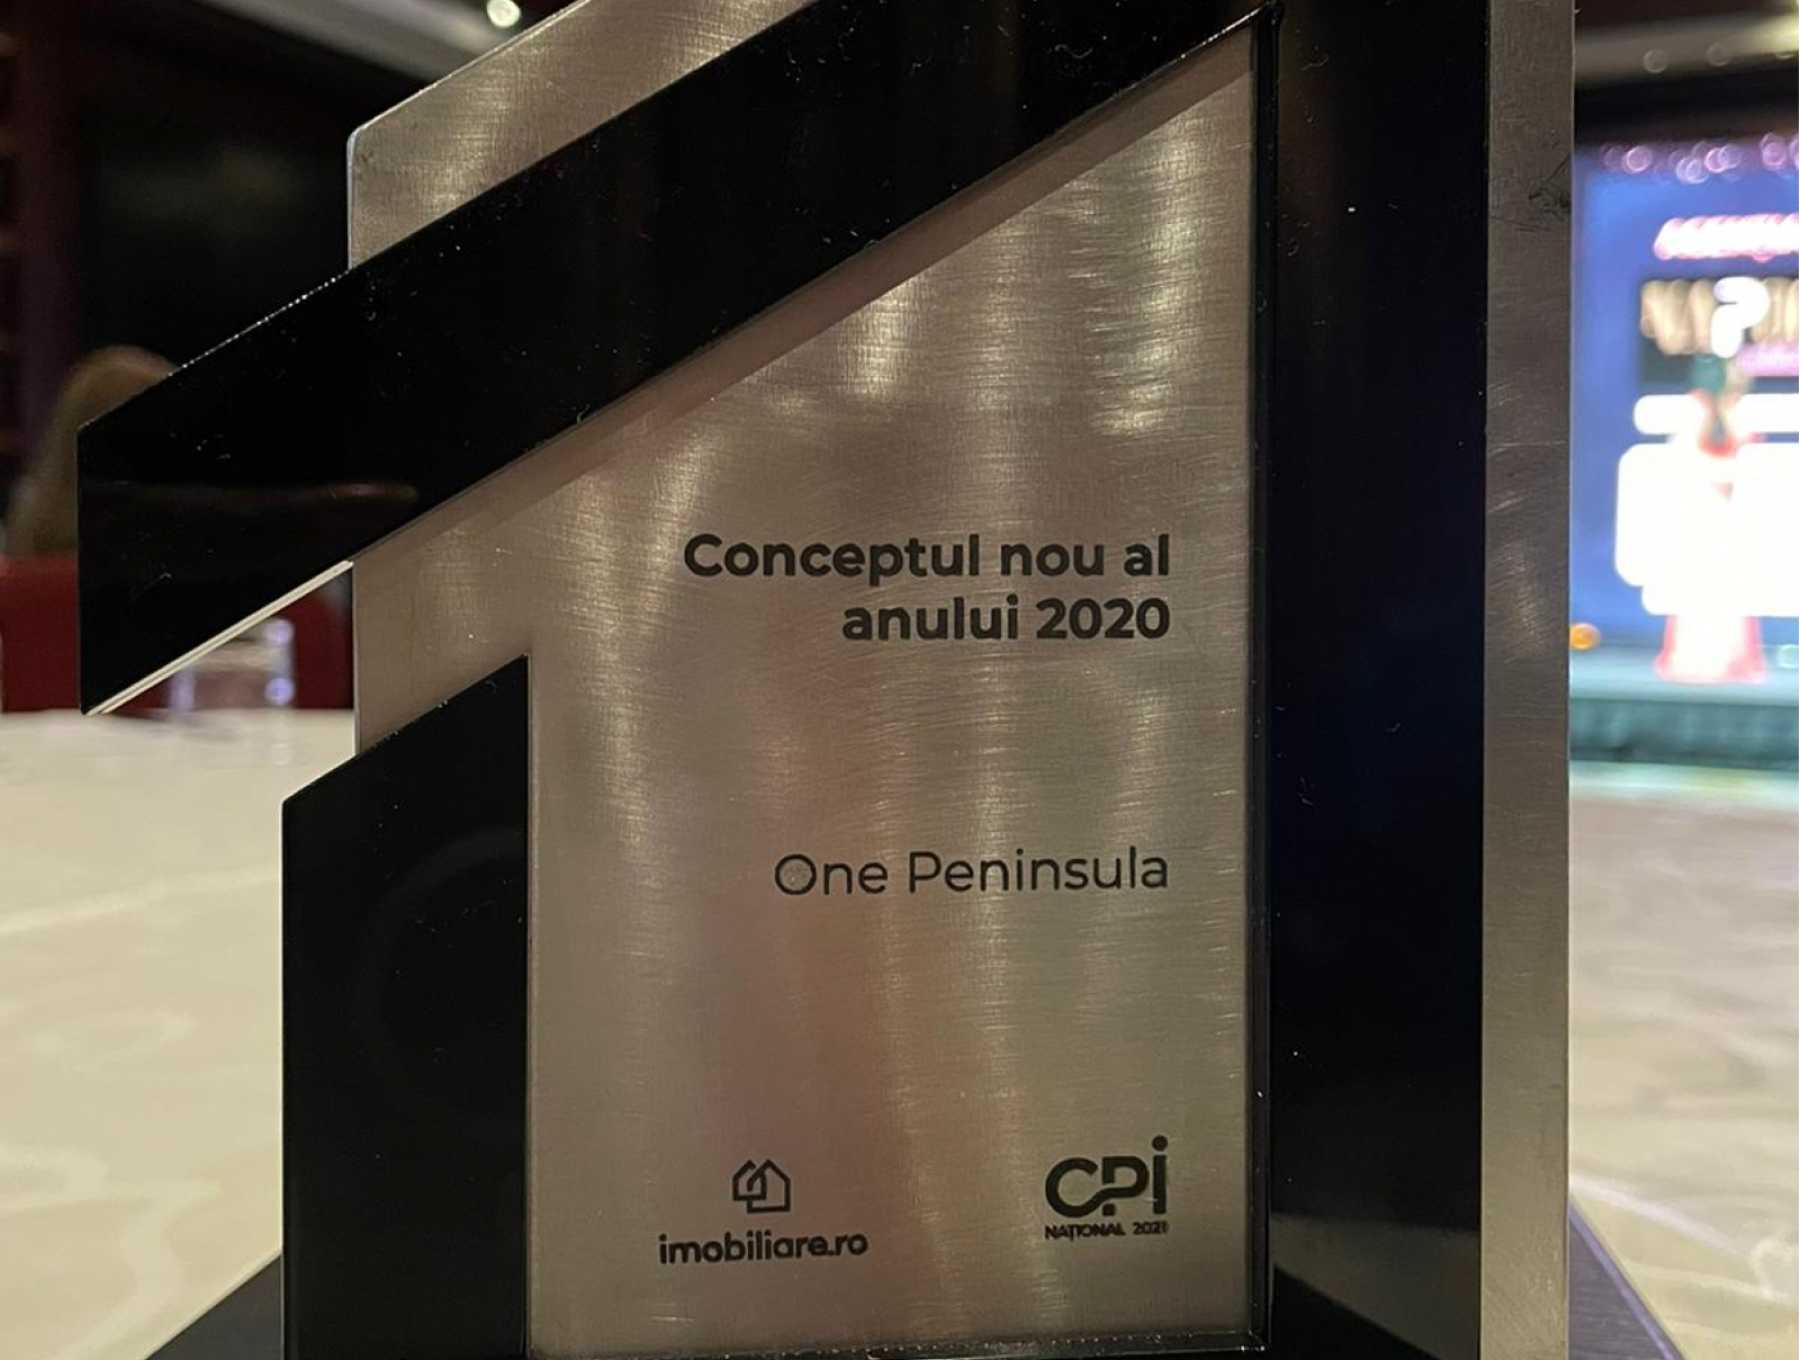 One Peninsula awarded with "New Concept of 2020" distinction at the Real Estate Professionals Gala